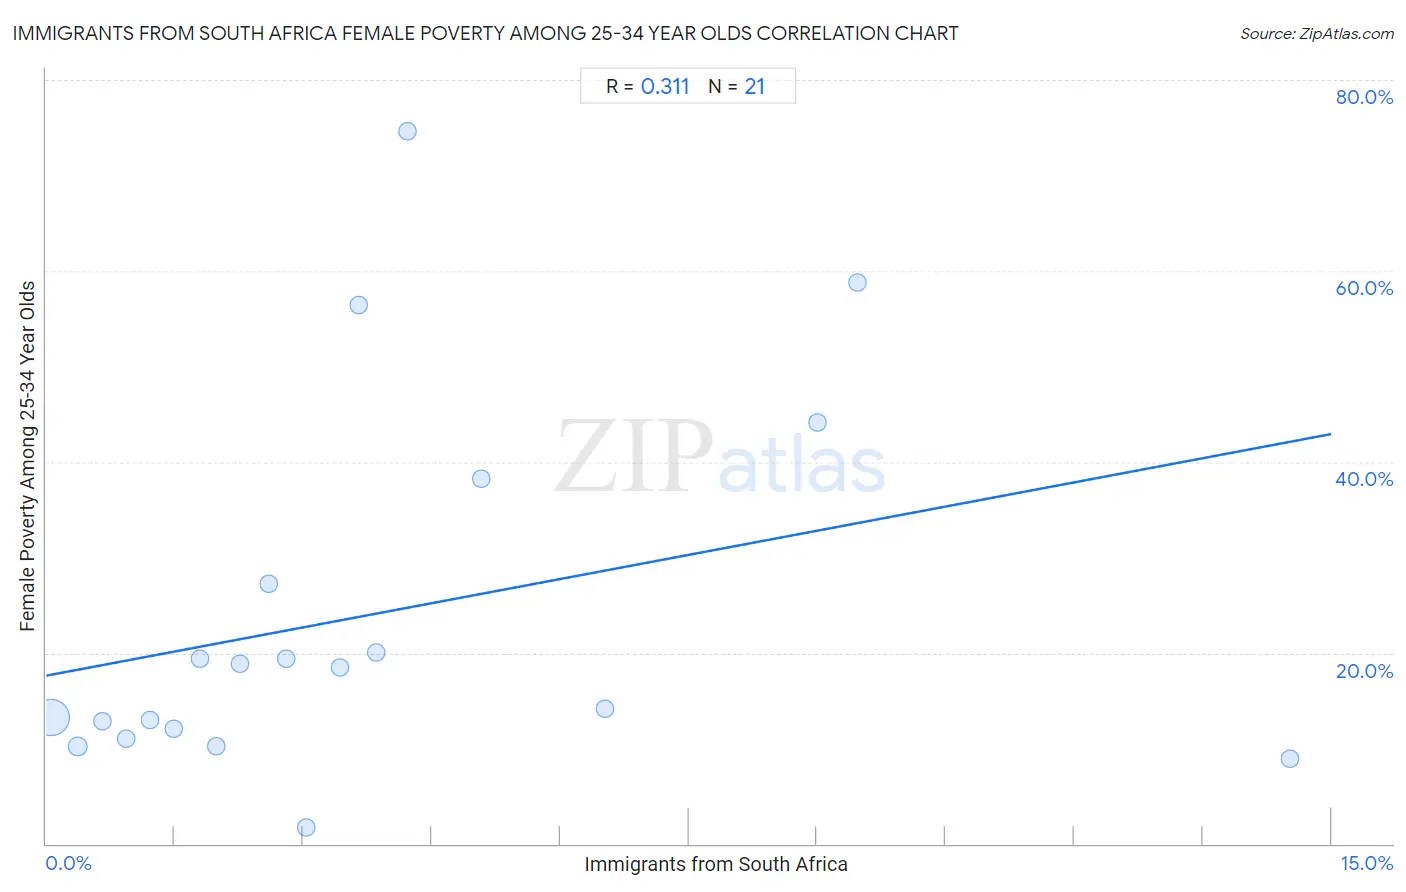 Immigrants from South Africa Female Poverty Among 25-34 Year Olds